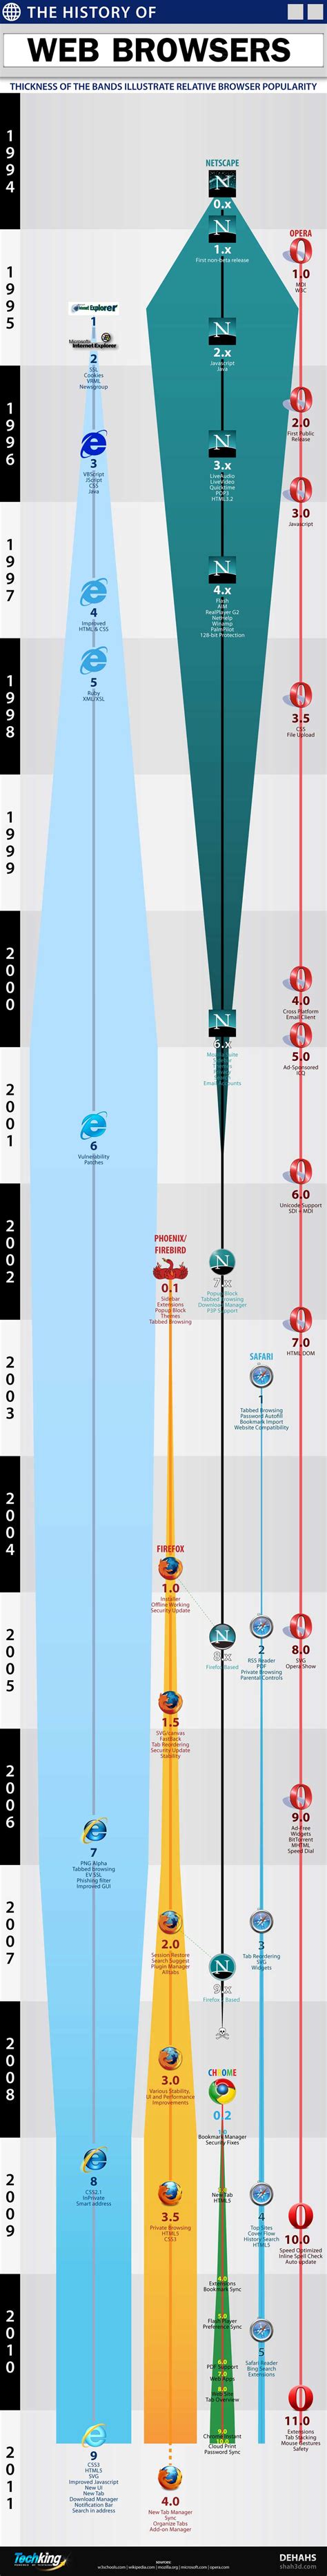 browser evolution  history  web browsers infographic tech king